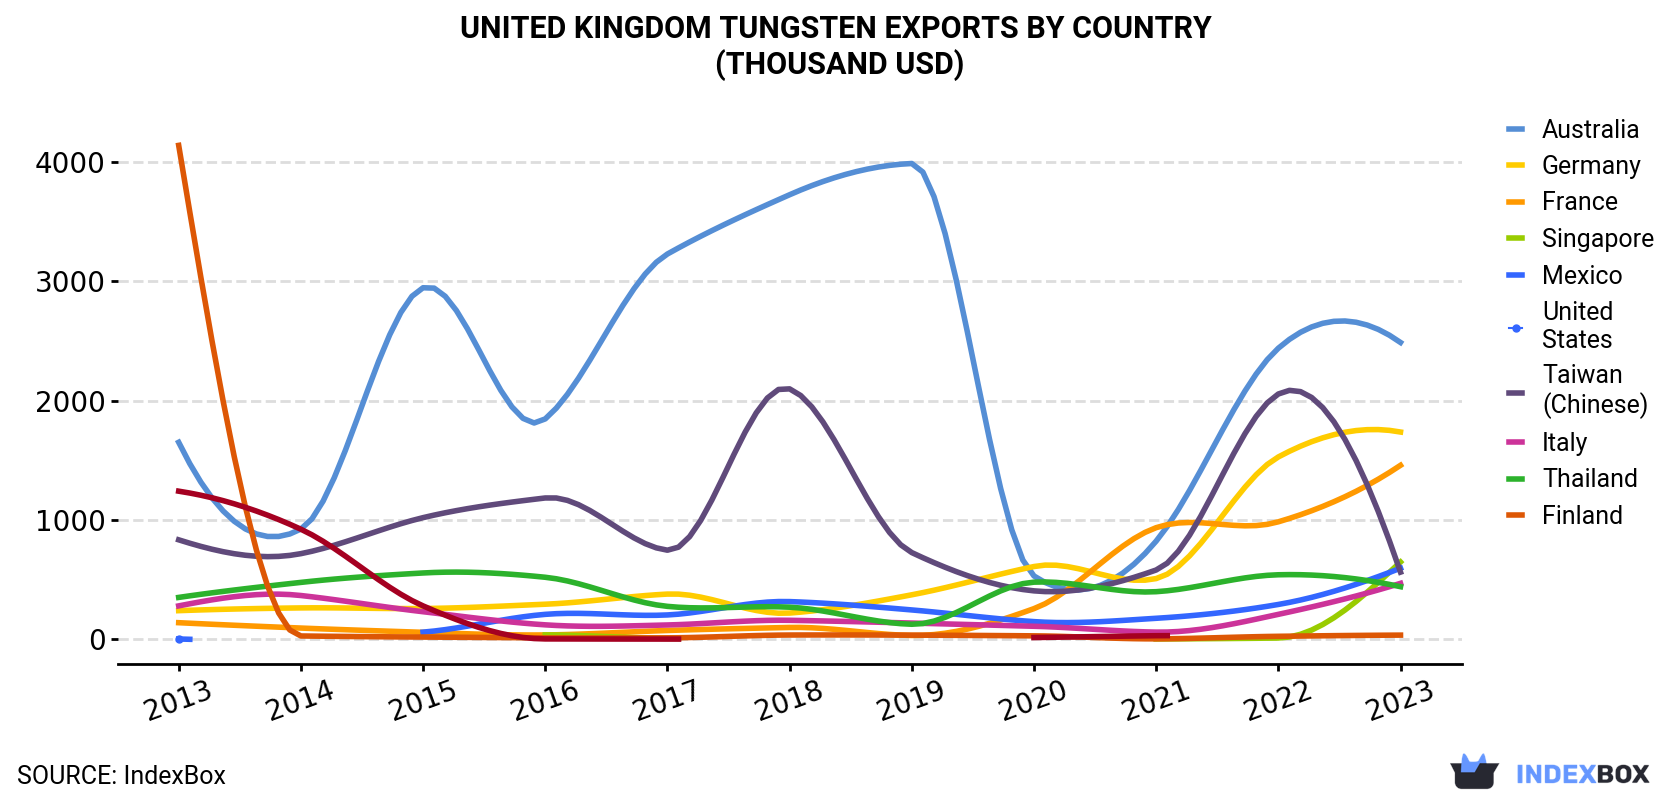 United Kingdom Tungsten Exports By Country (Thousand USD)